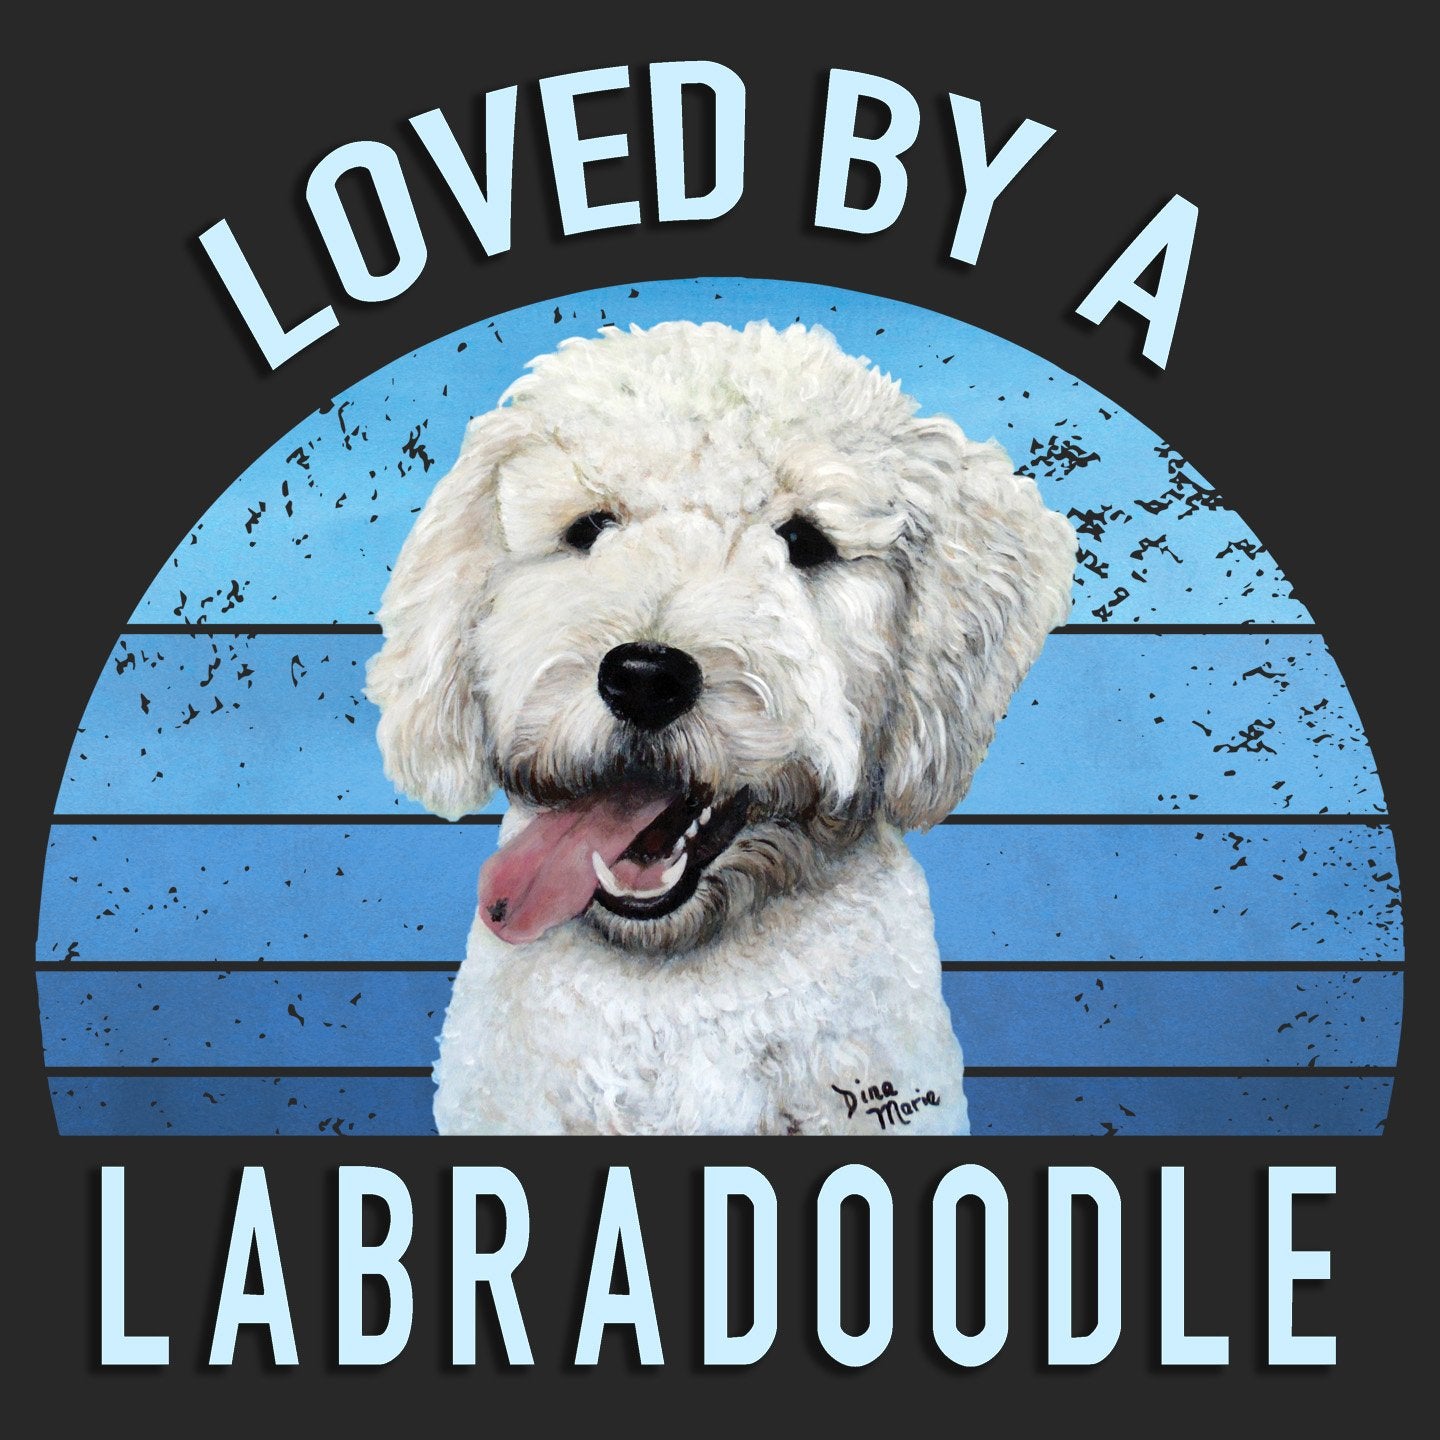 Loved By A Labradoodle - Kids' Unisex T-Shirt